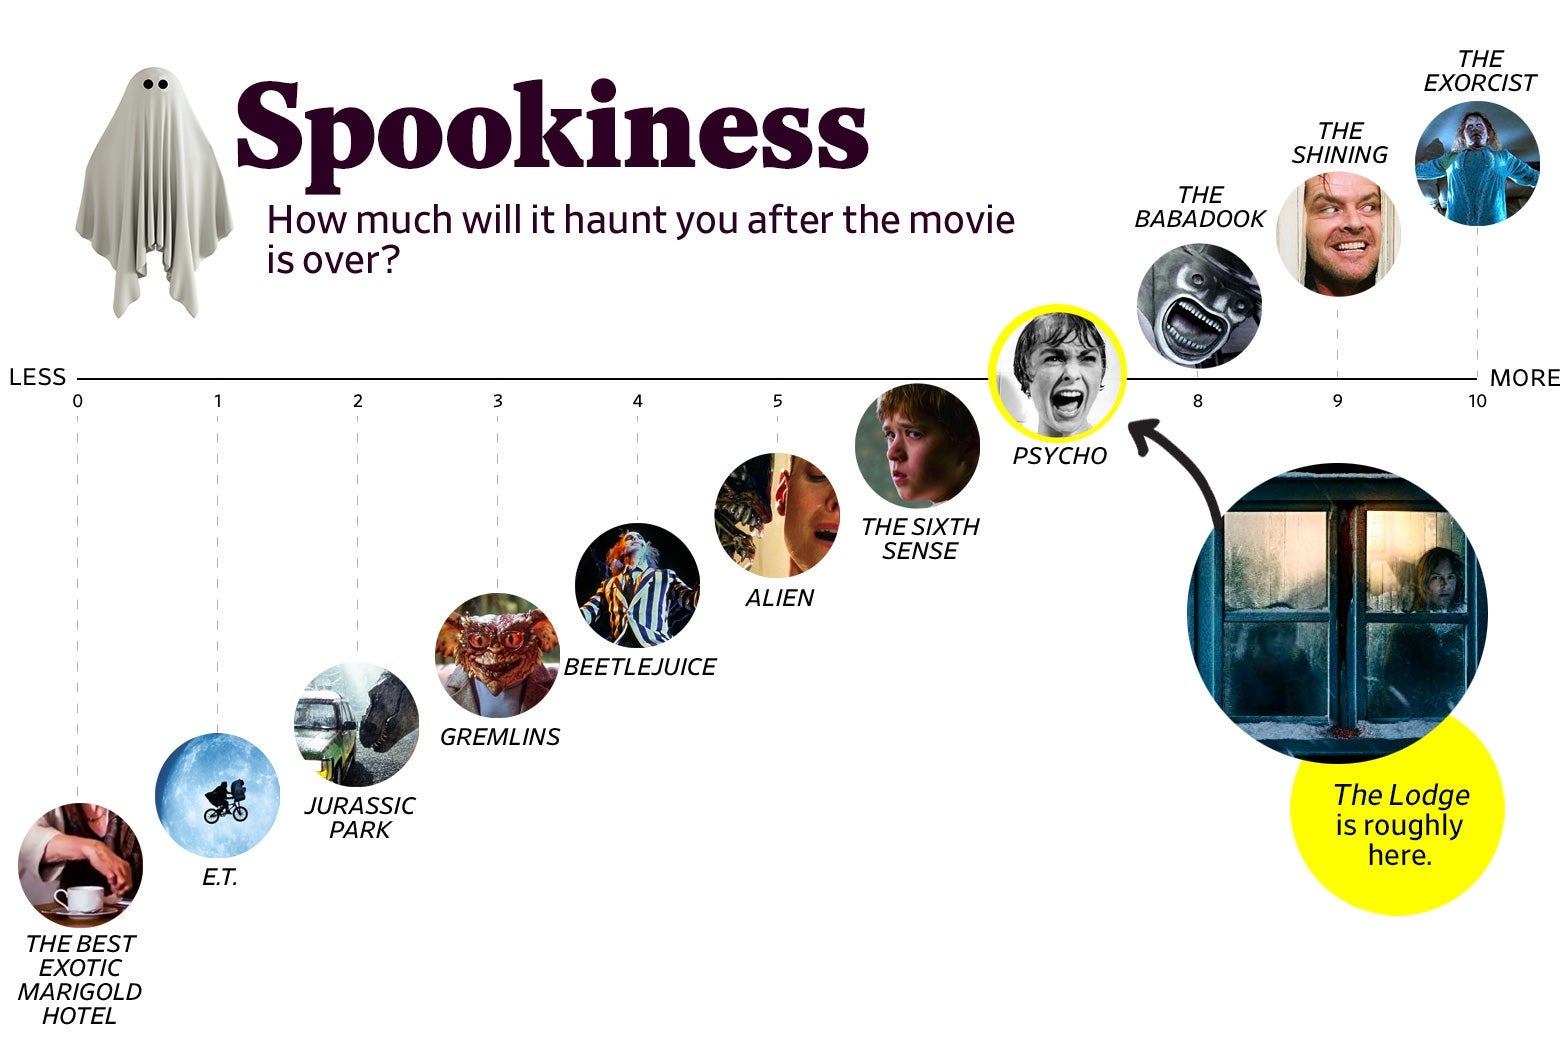 : A chart titled “Spookiness: How much will it haunt you after the movie is over?” shows that The Lodge ranks a 7 in spookiness, roughly the same as Psycho. The scale ranges from The Best Exotic Marigold Hotel (0) to The Exorcist (10).